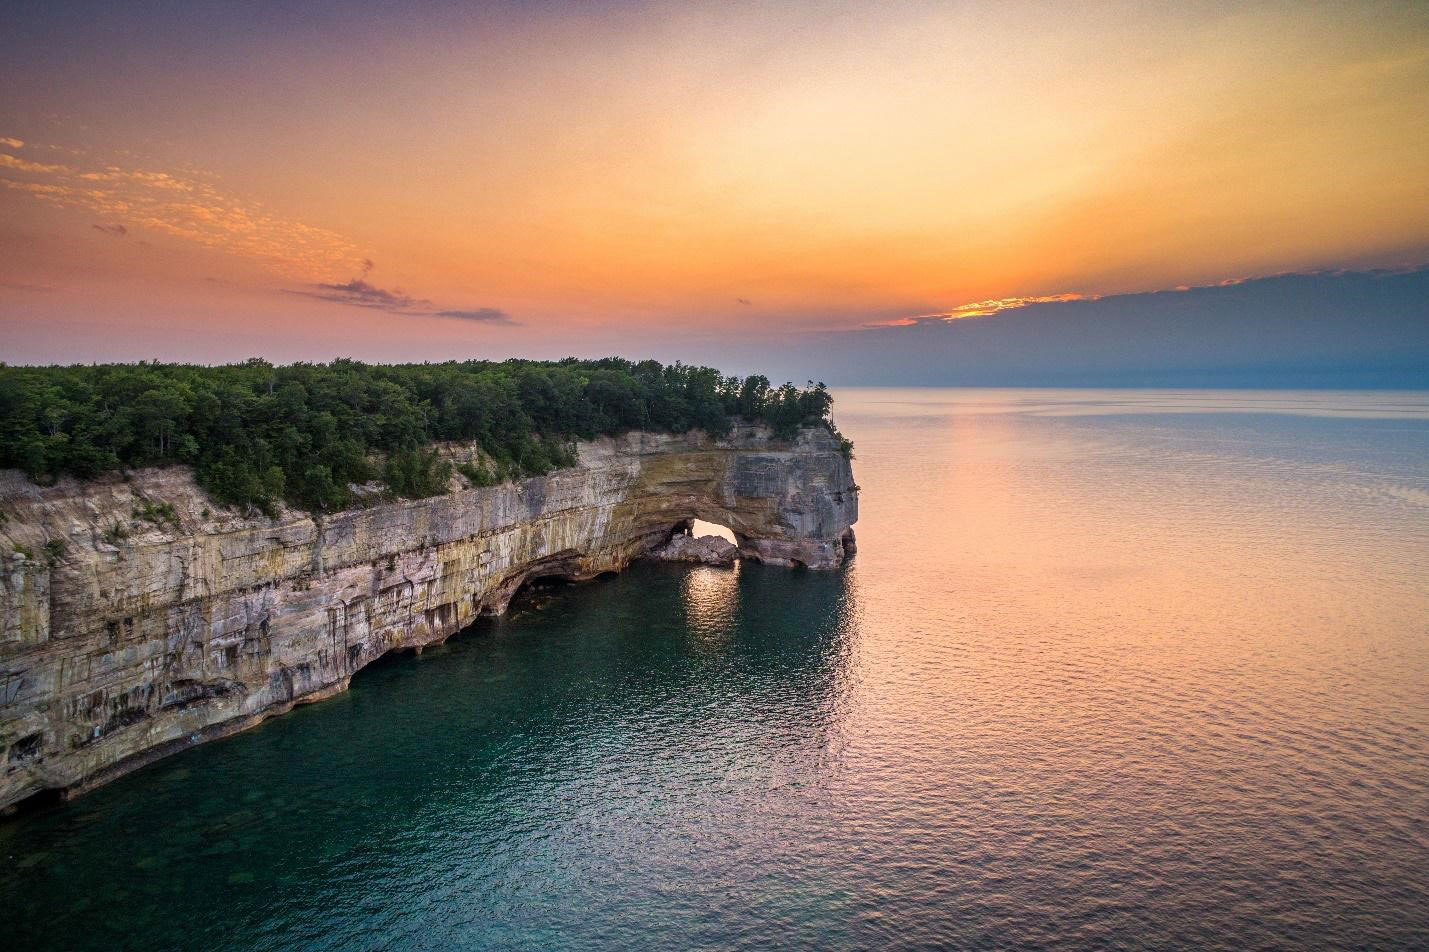 Grand Portal Point, an archway in the Pictured Rocks National Lakeshore